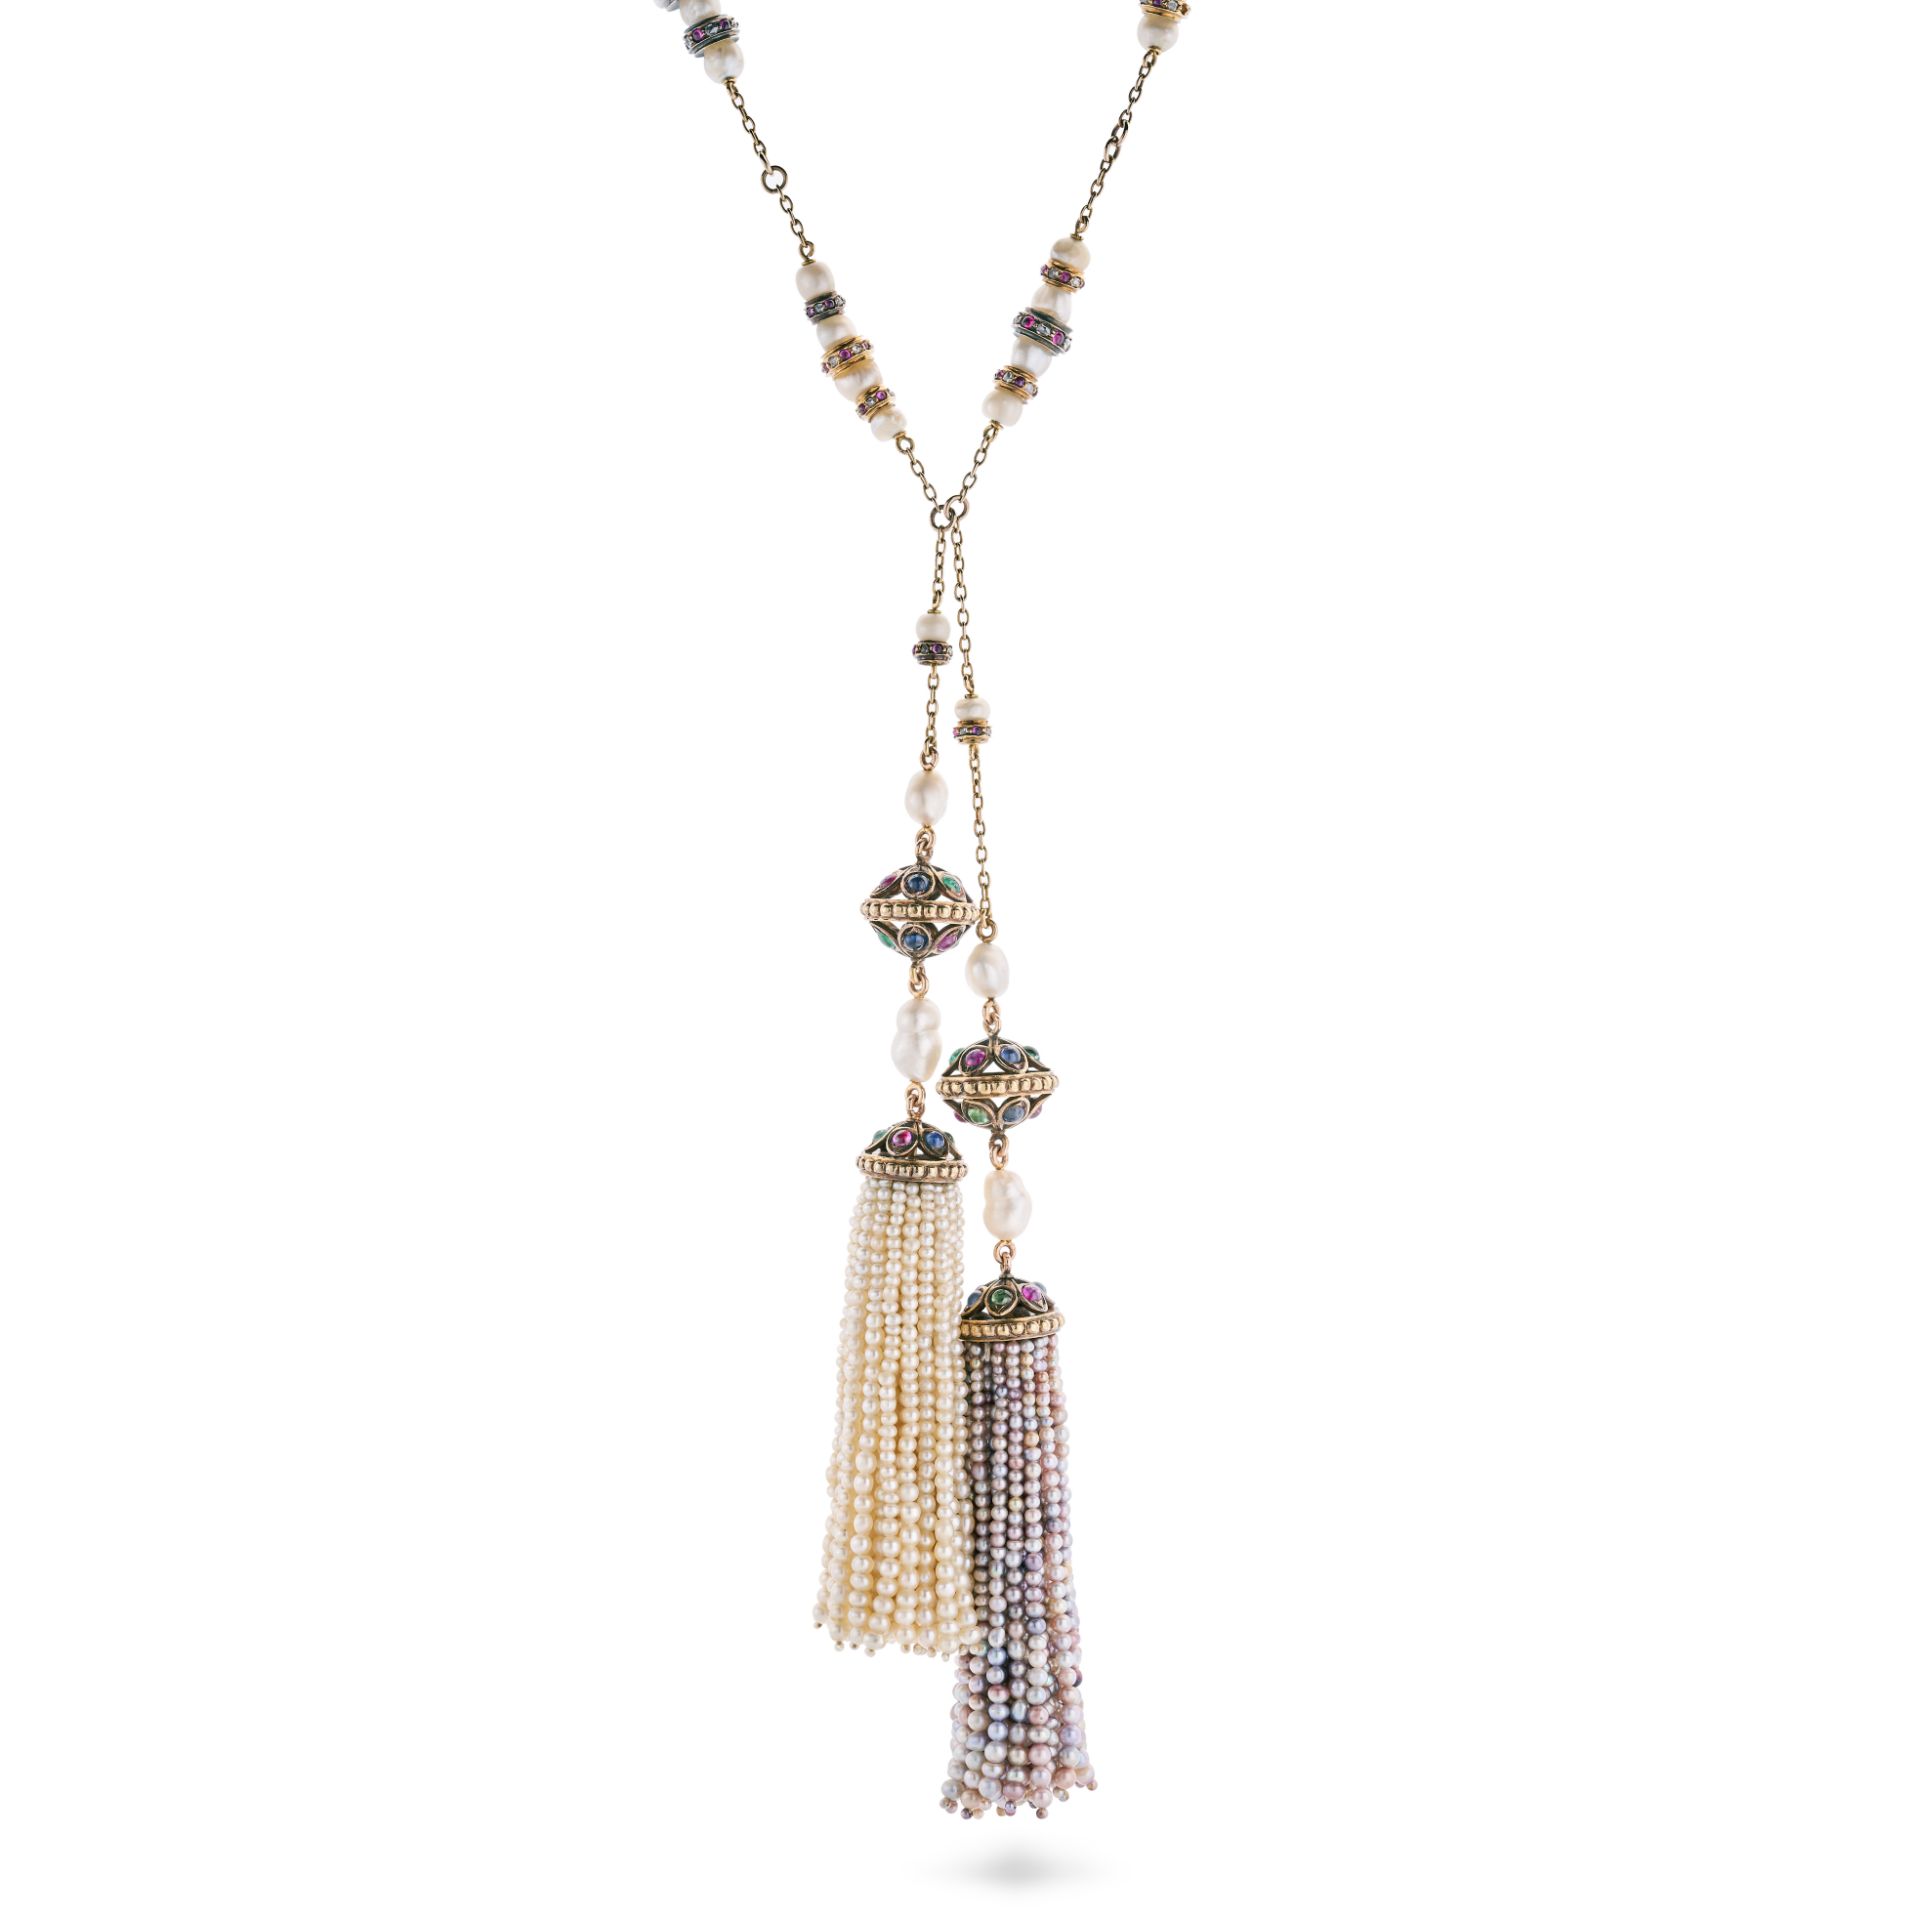 A FINE FRENCH GEMSET NATURAL PEARL TASSEL NECKLACE in yellow gold, the chain set with pearls and ...